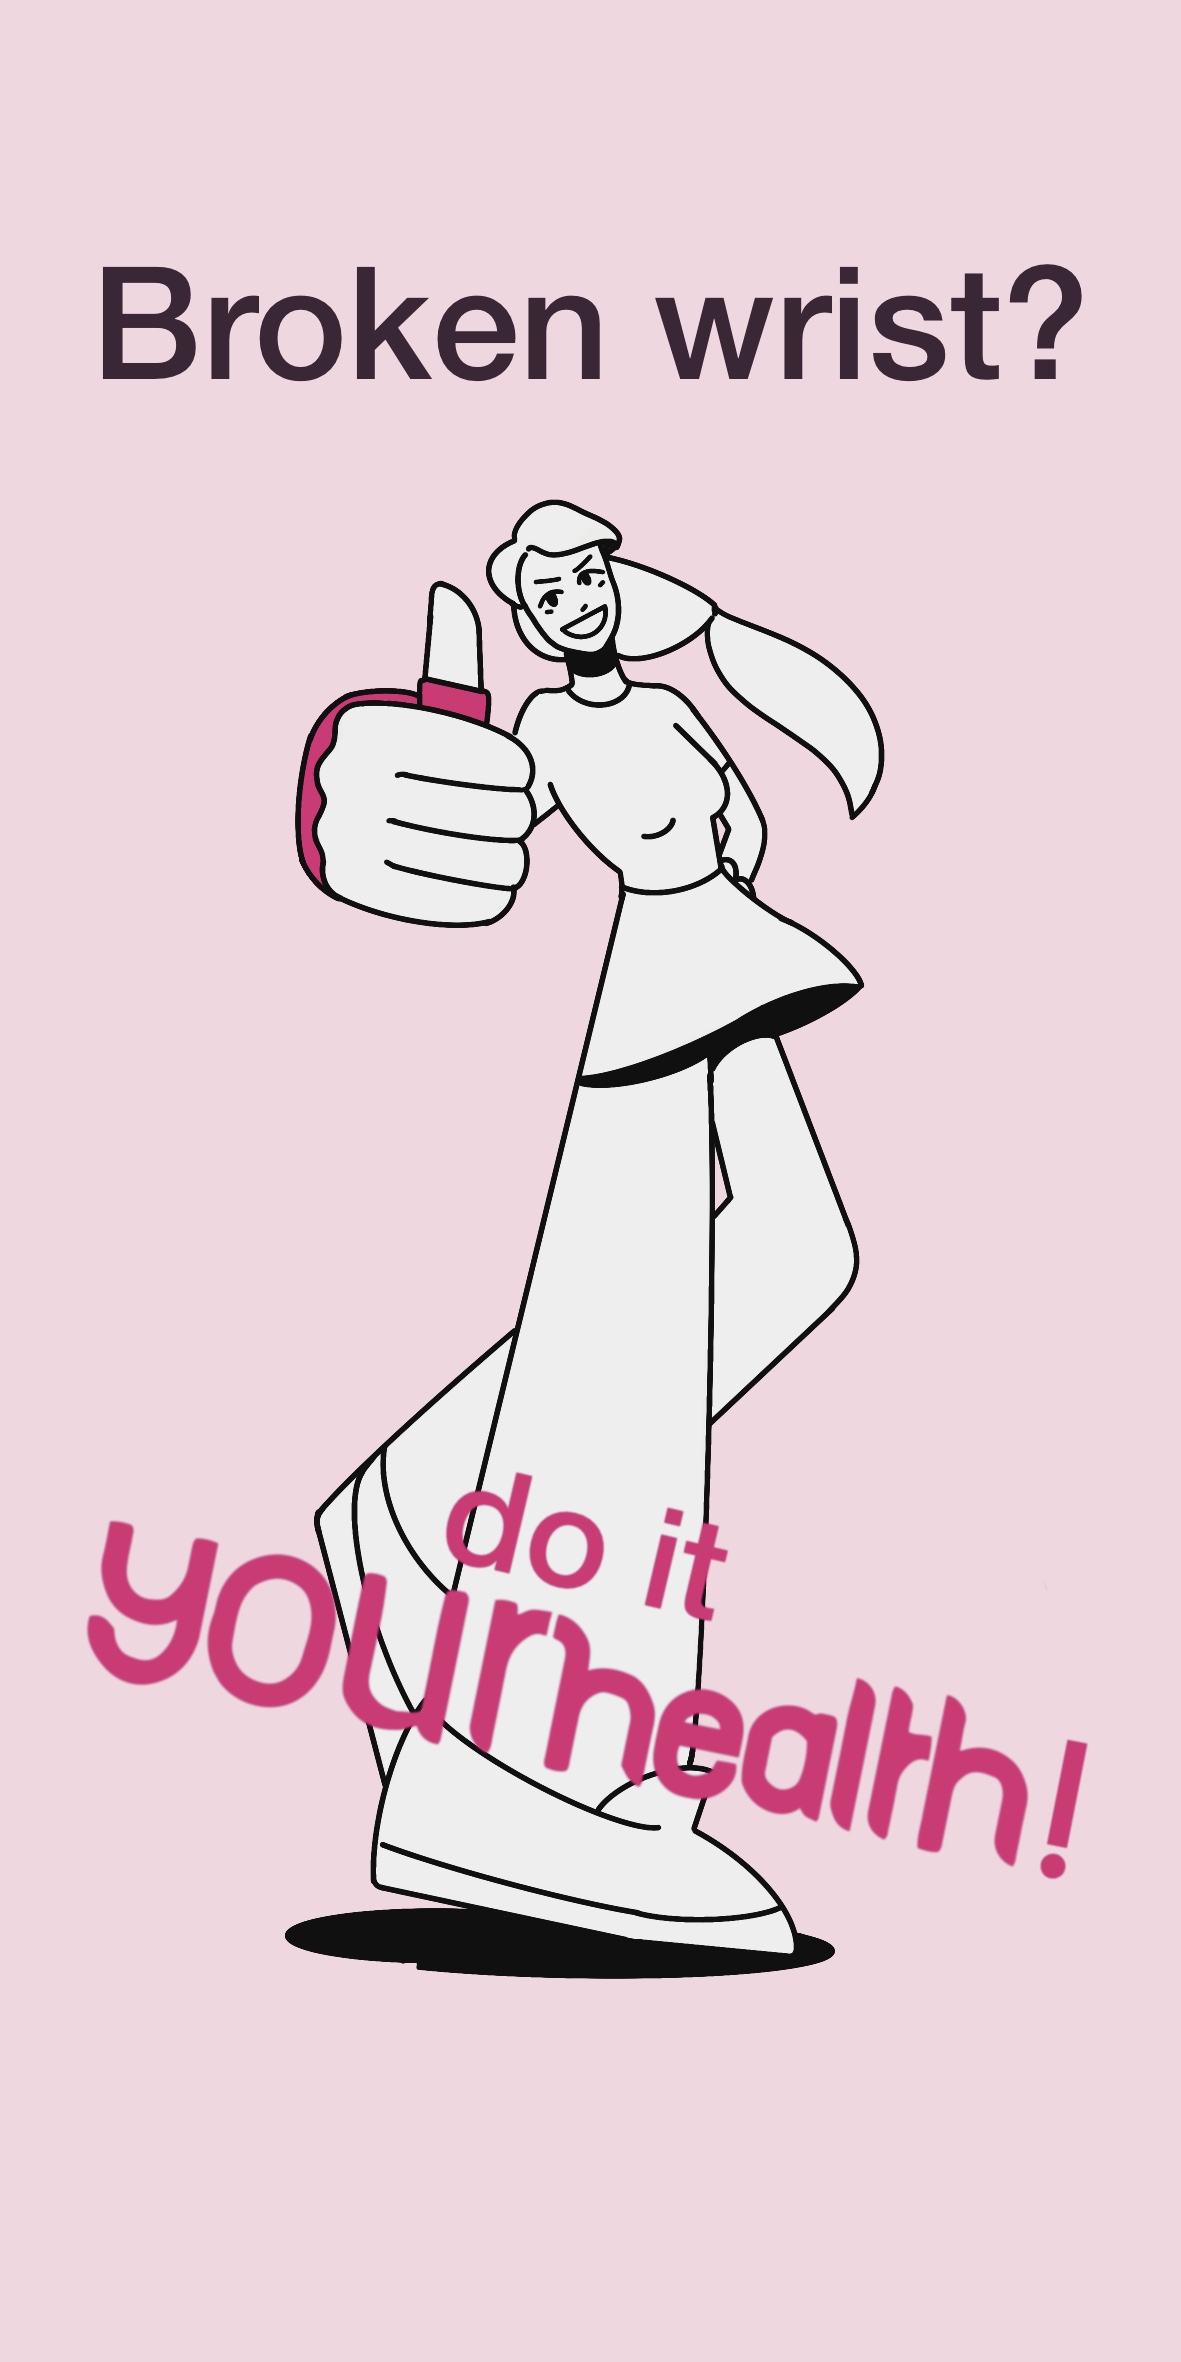 Illustrated piece by Alyona Subkhankulova showing figure putting her thumb up, with text "Broken wrist? Do it yourhealth!"